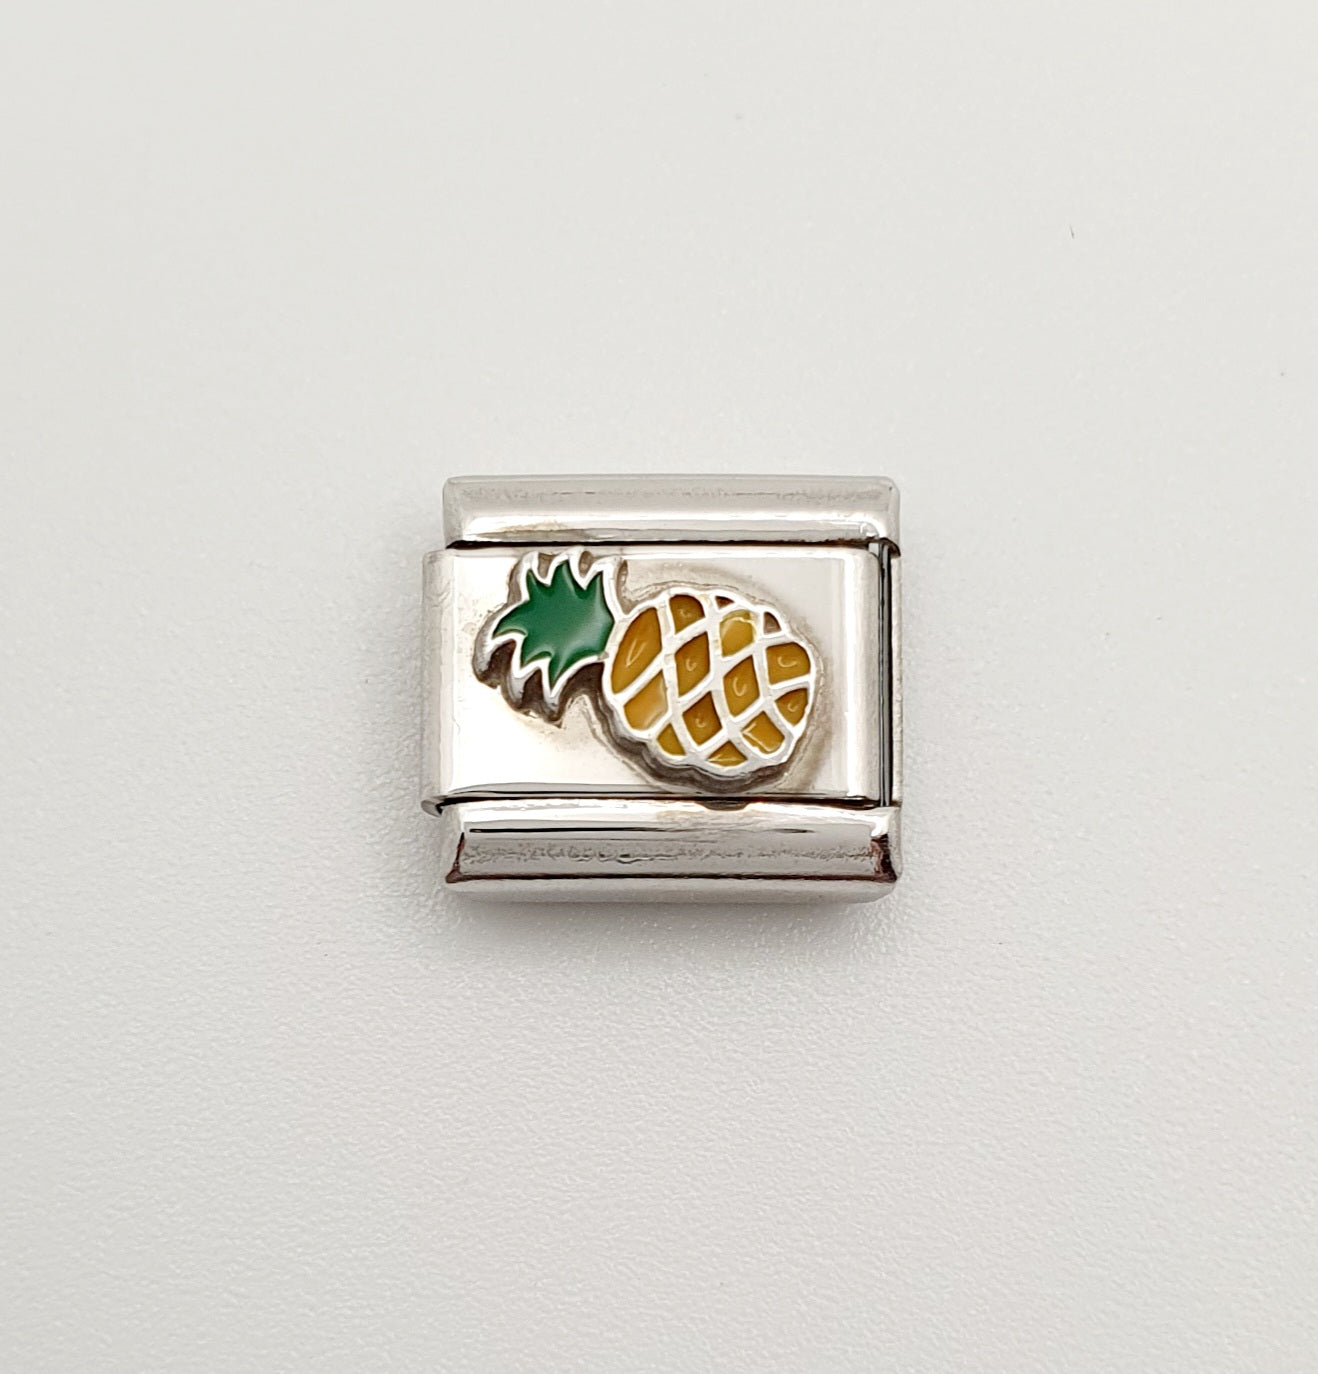 Nomination Charm Link "Pineapple" Stainless Steel with Enamel & 925 Silver, 330202 45